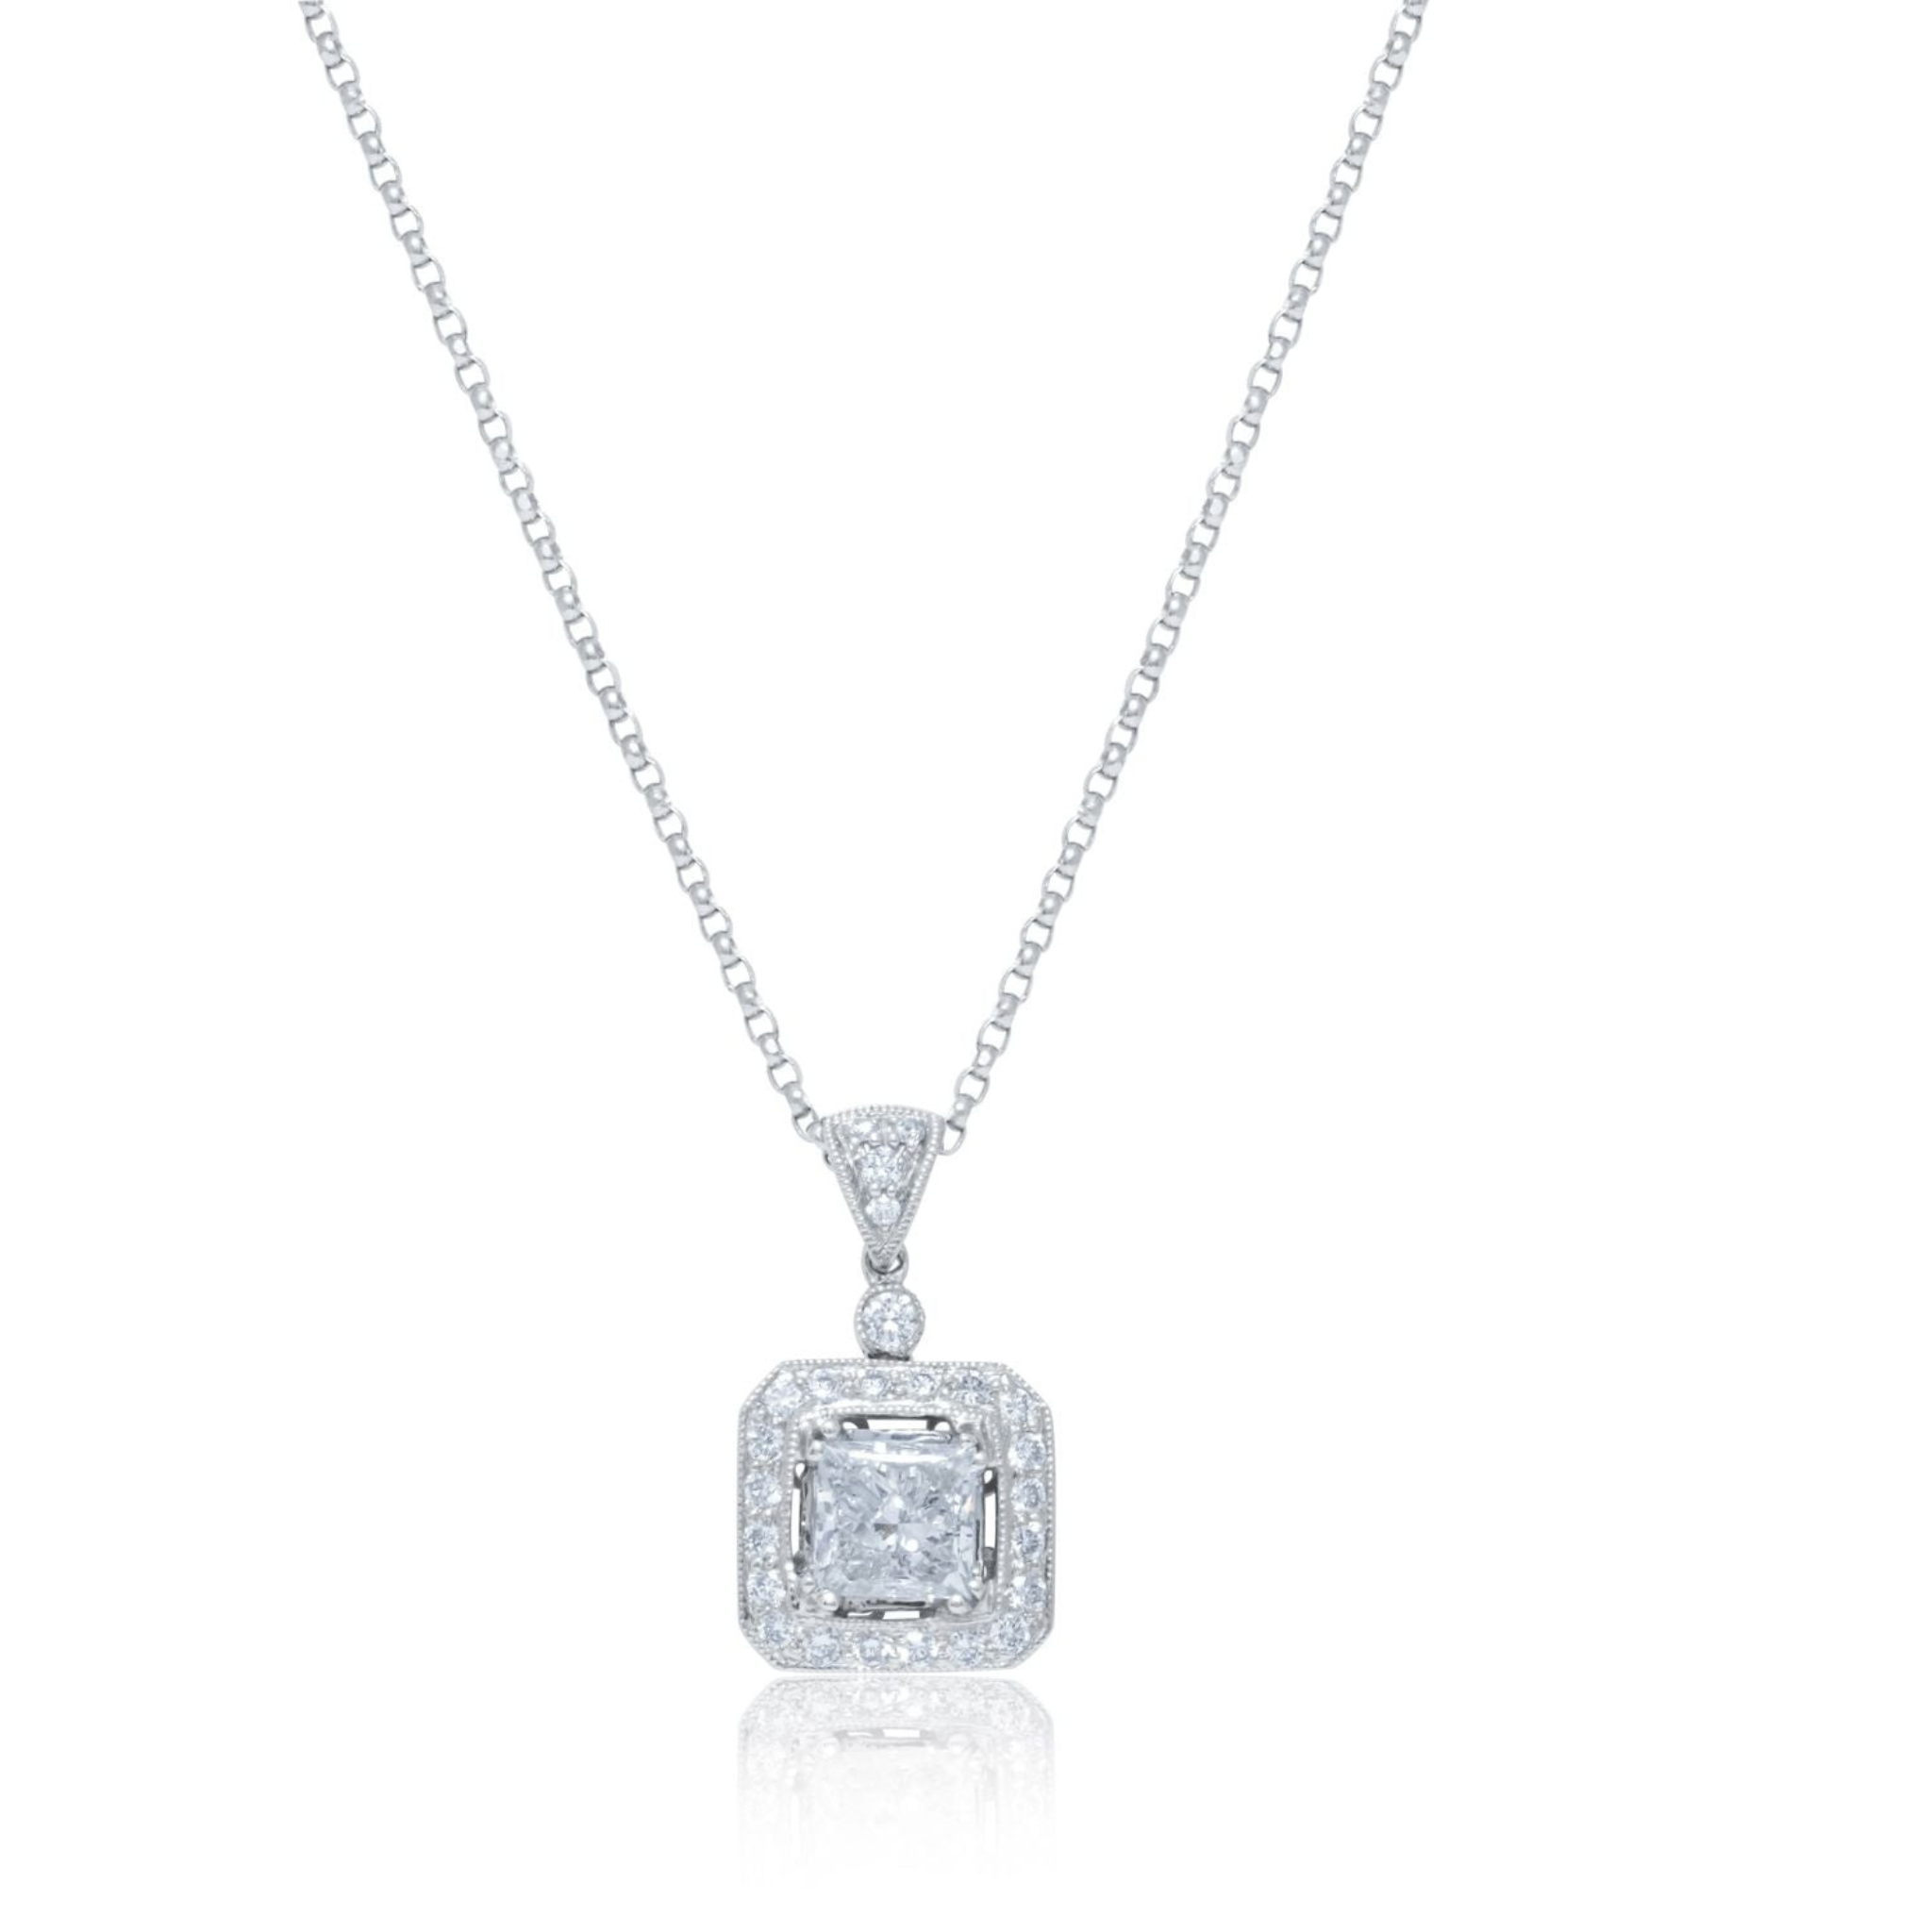 18kt White Gold Diamond Pendant with 1.49 Cts.jpg